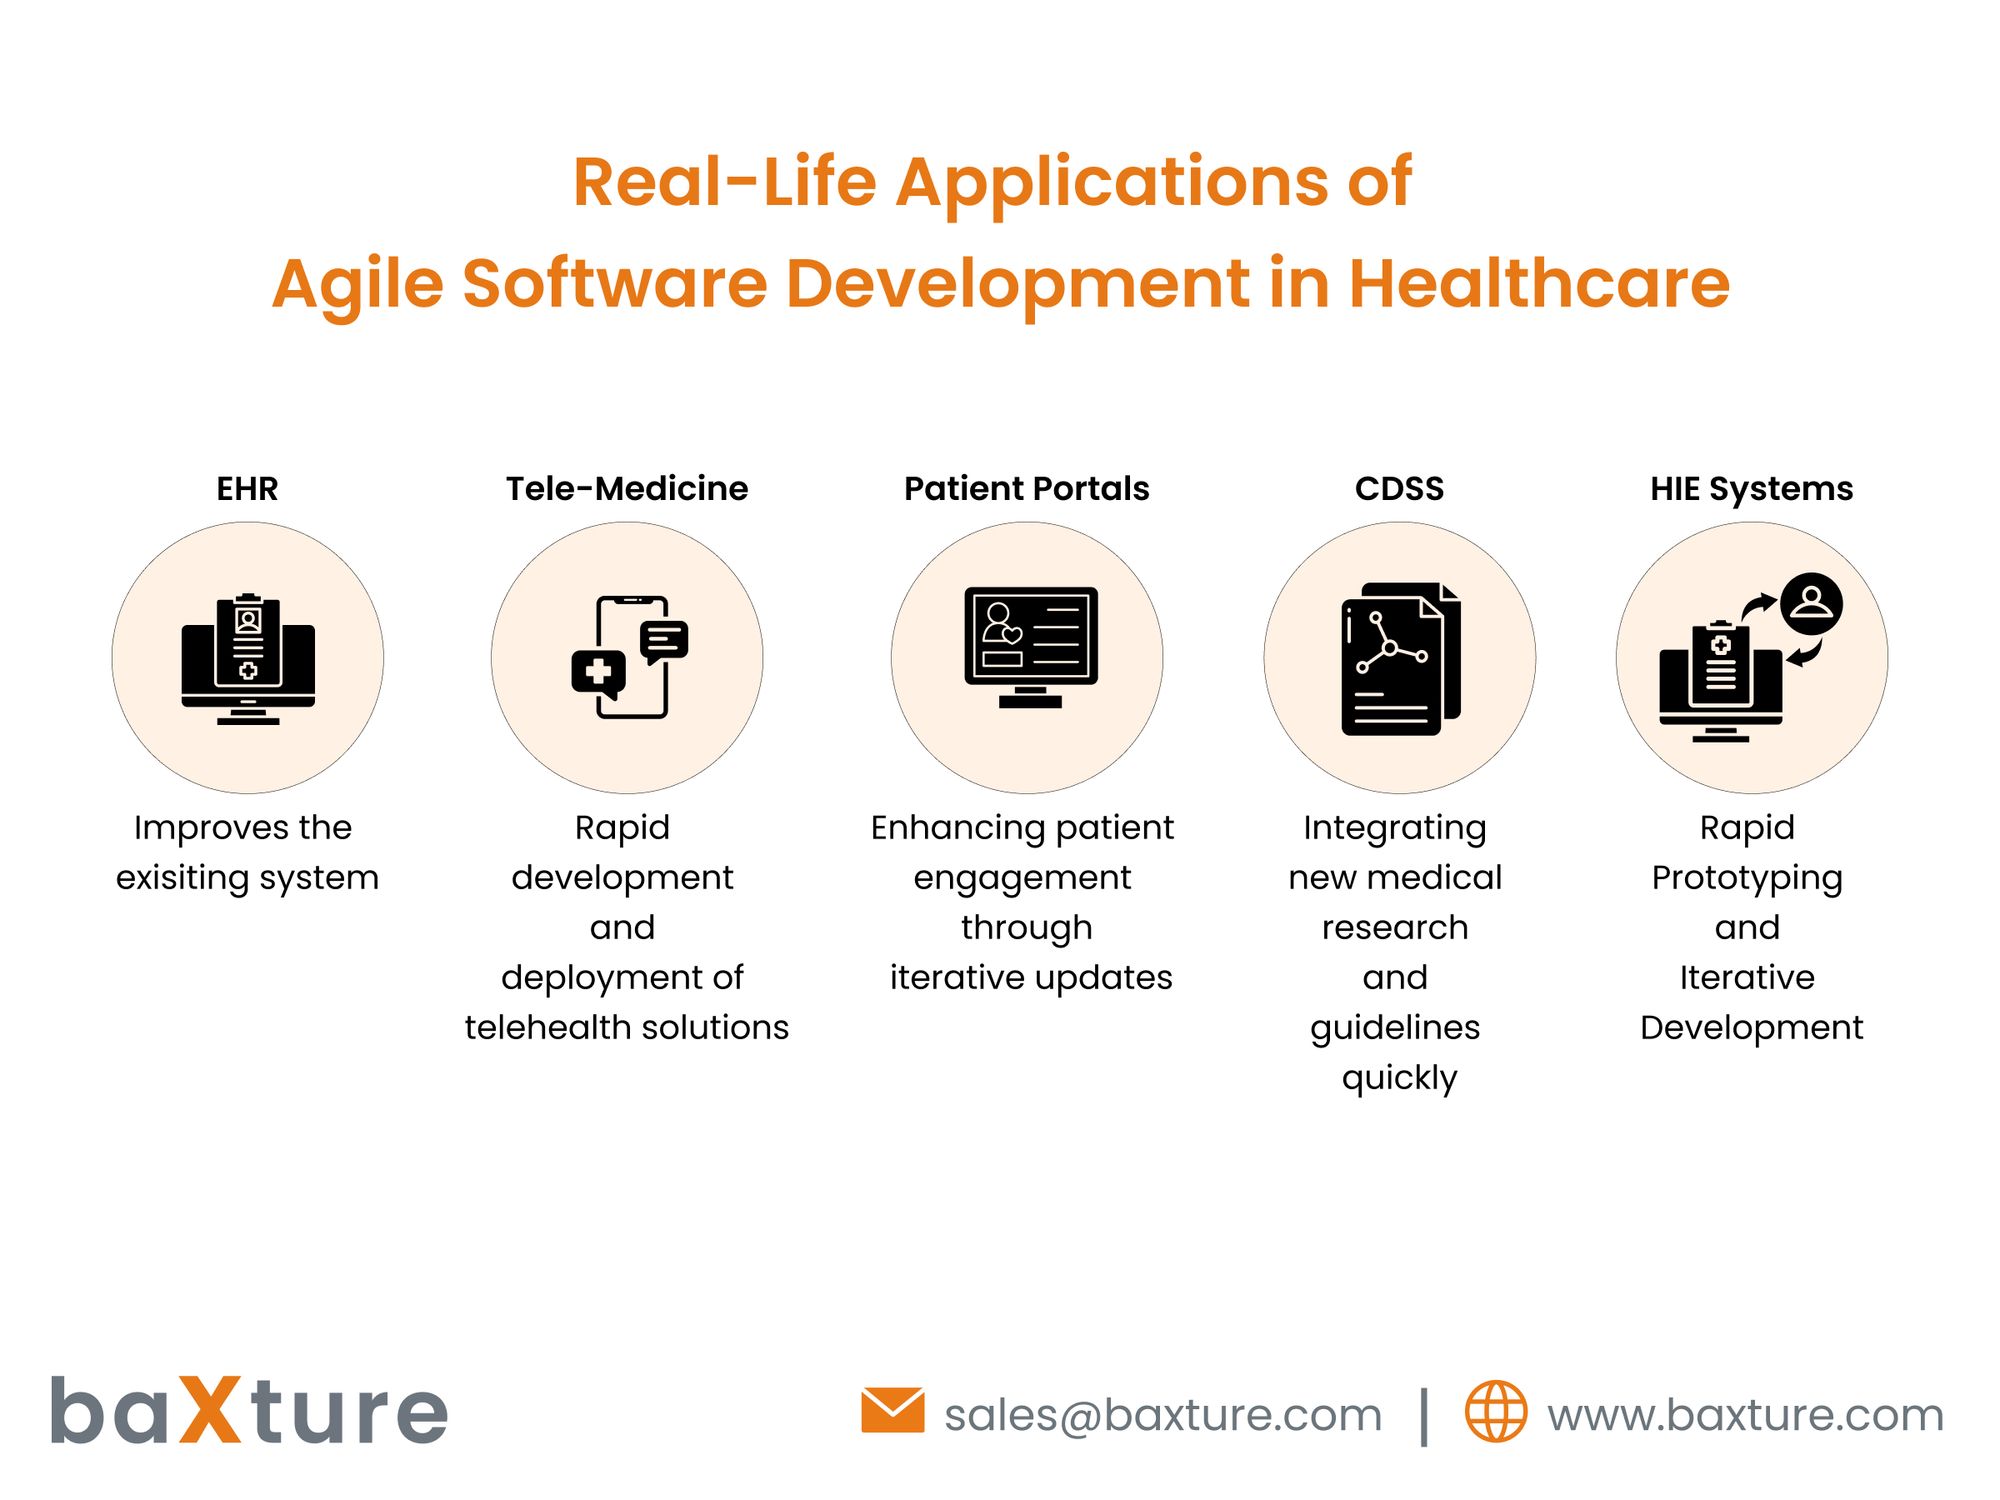 Real-Life Applications of Agile Software Development in Healthcare